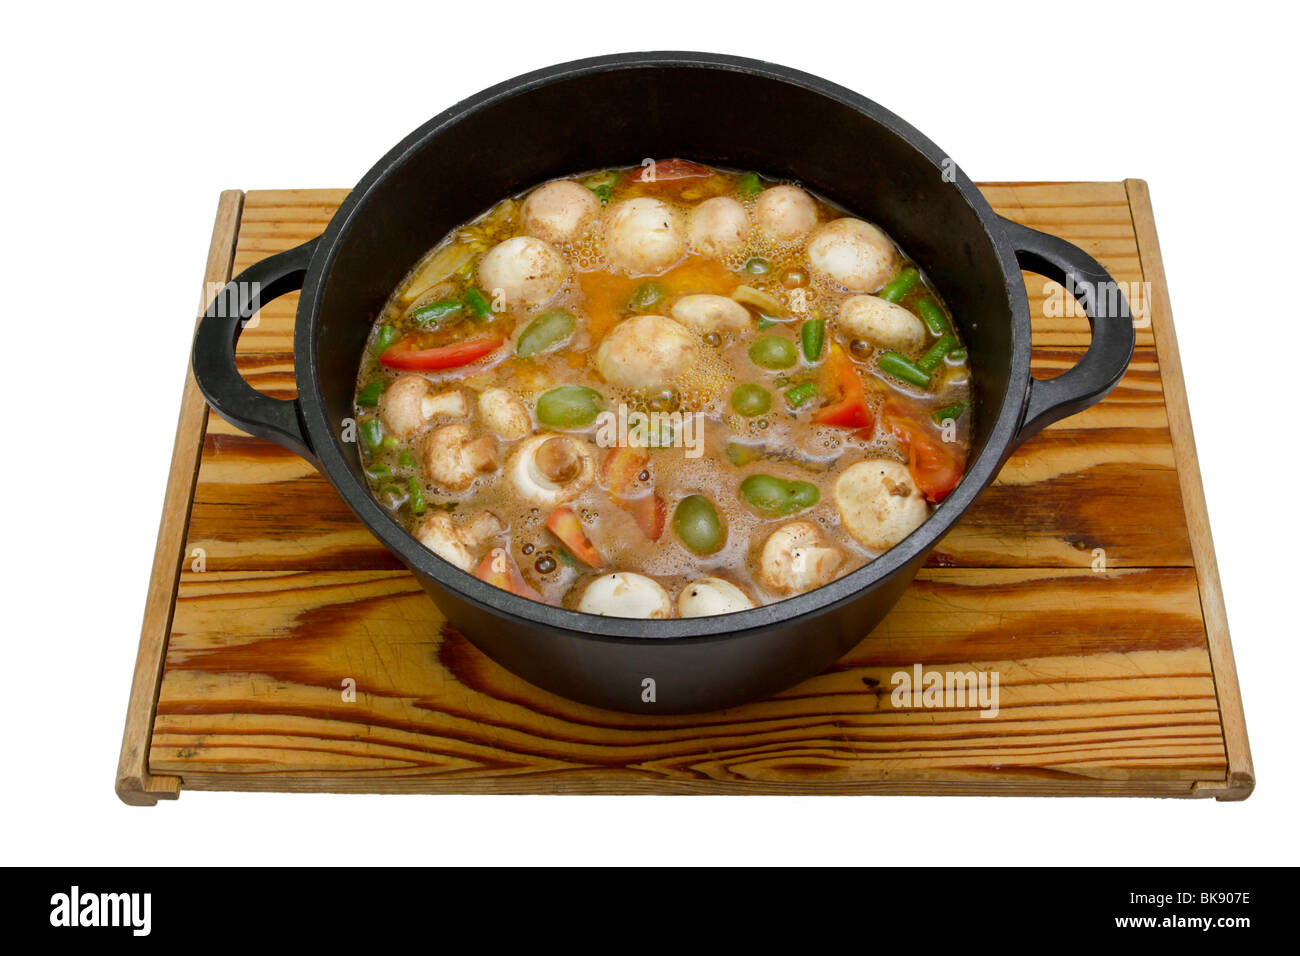 A hearty stew being prepared in a cast-iron pot, isolated on a white background. Stock Photo